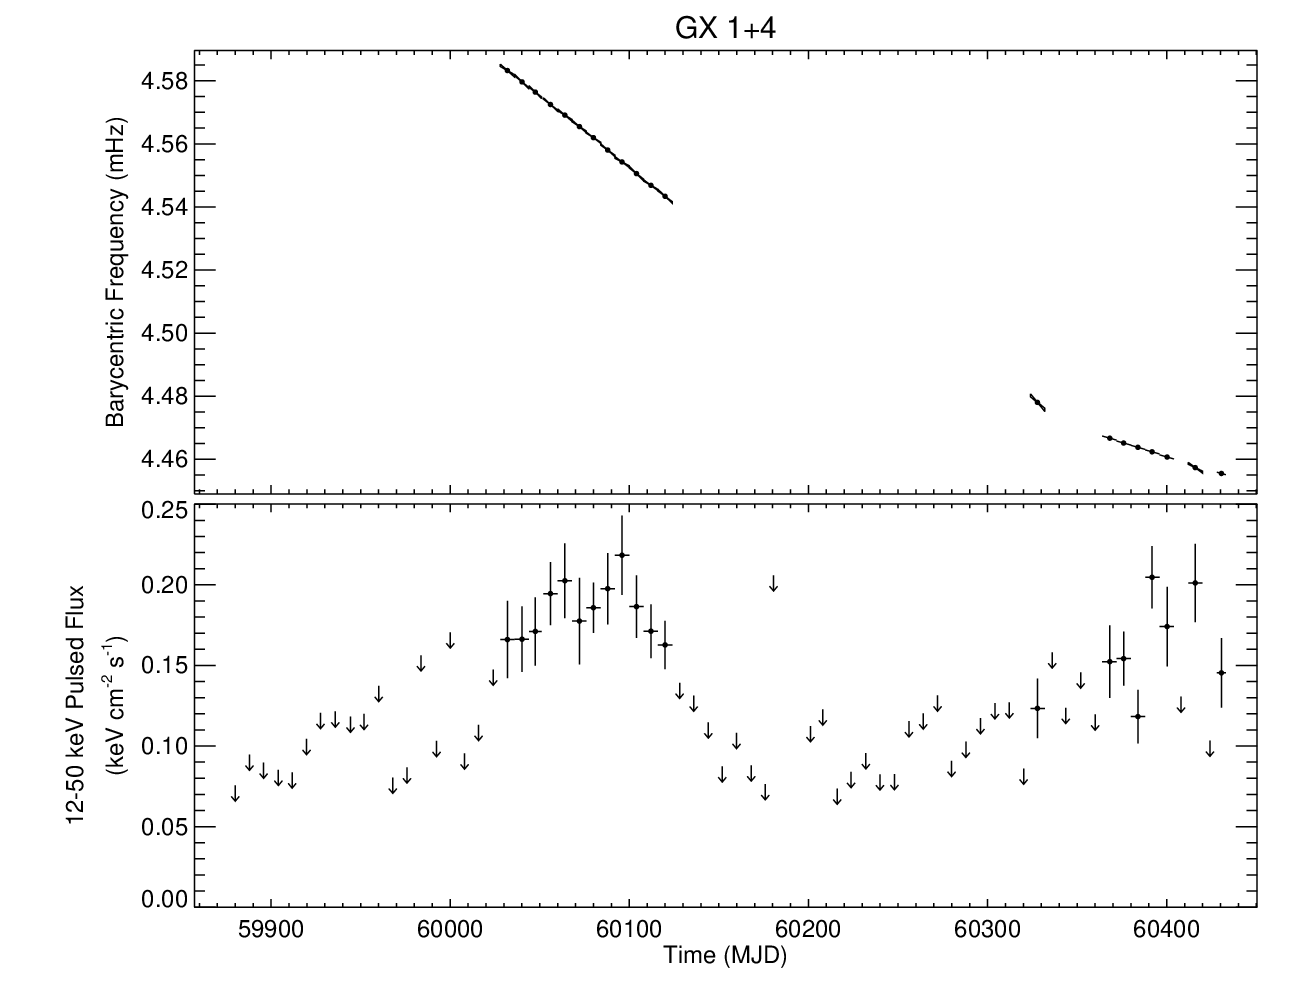 GX 1+4 Short Frequency History